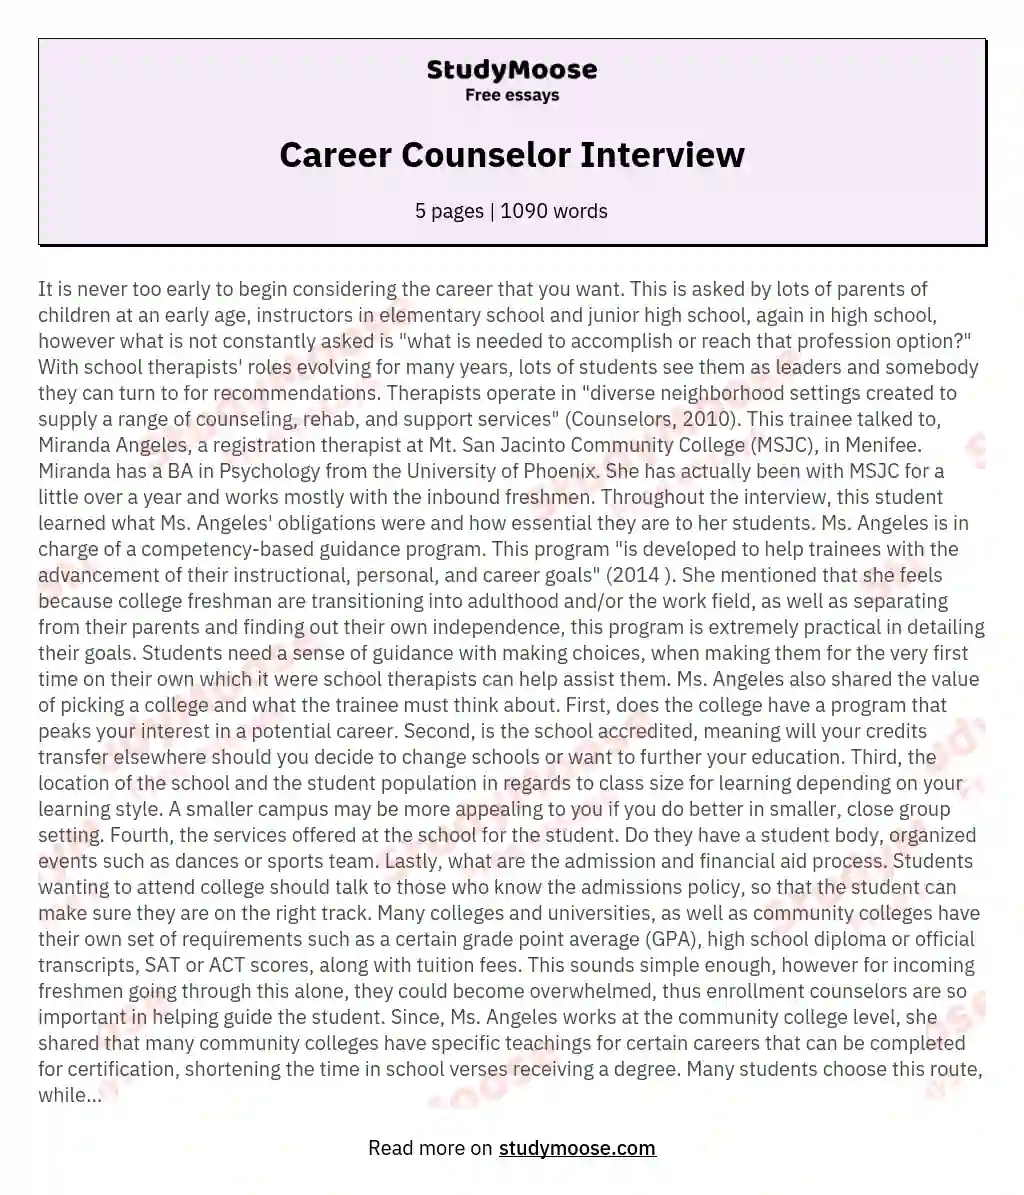 Career Counselor Interview